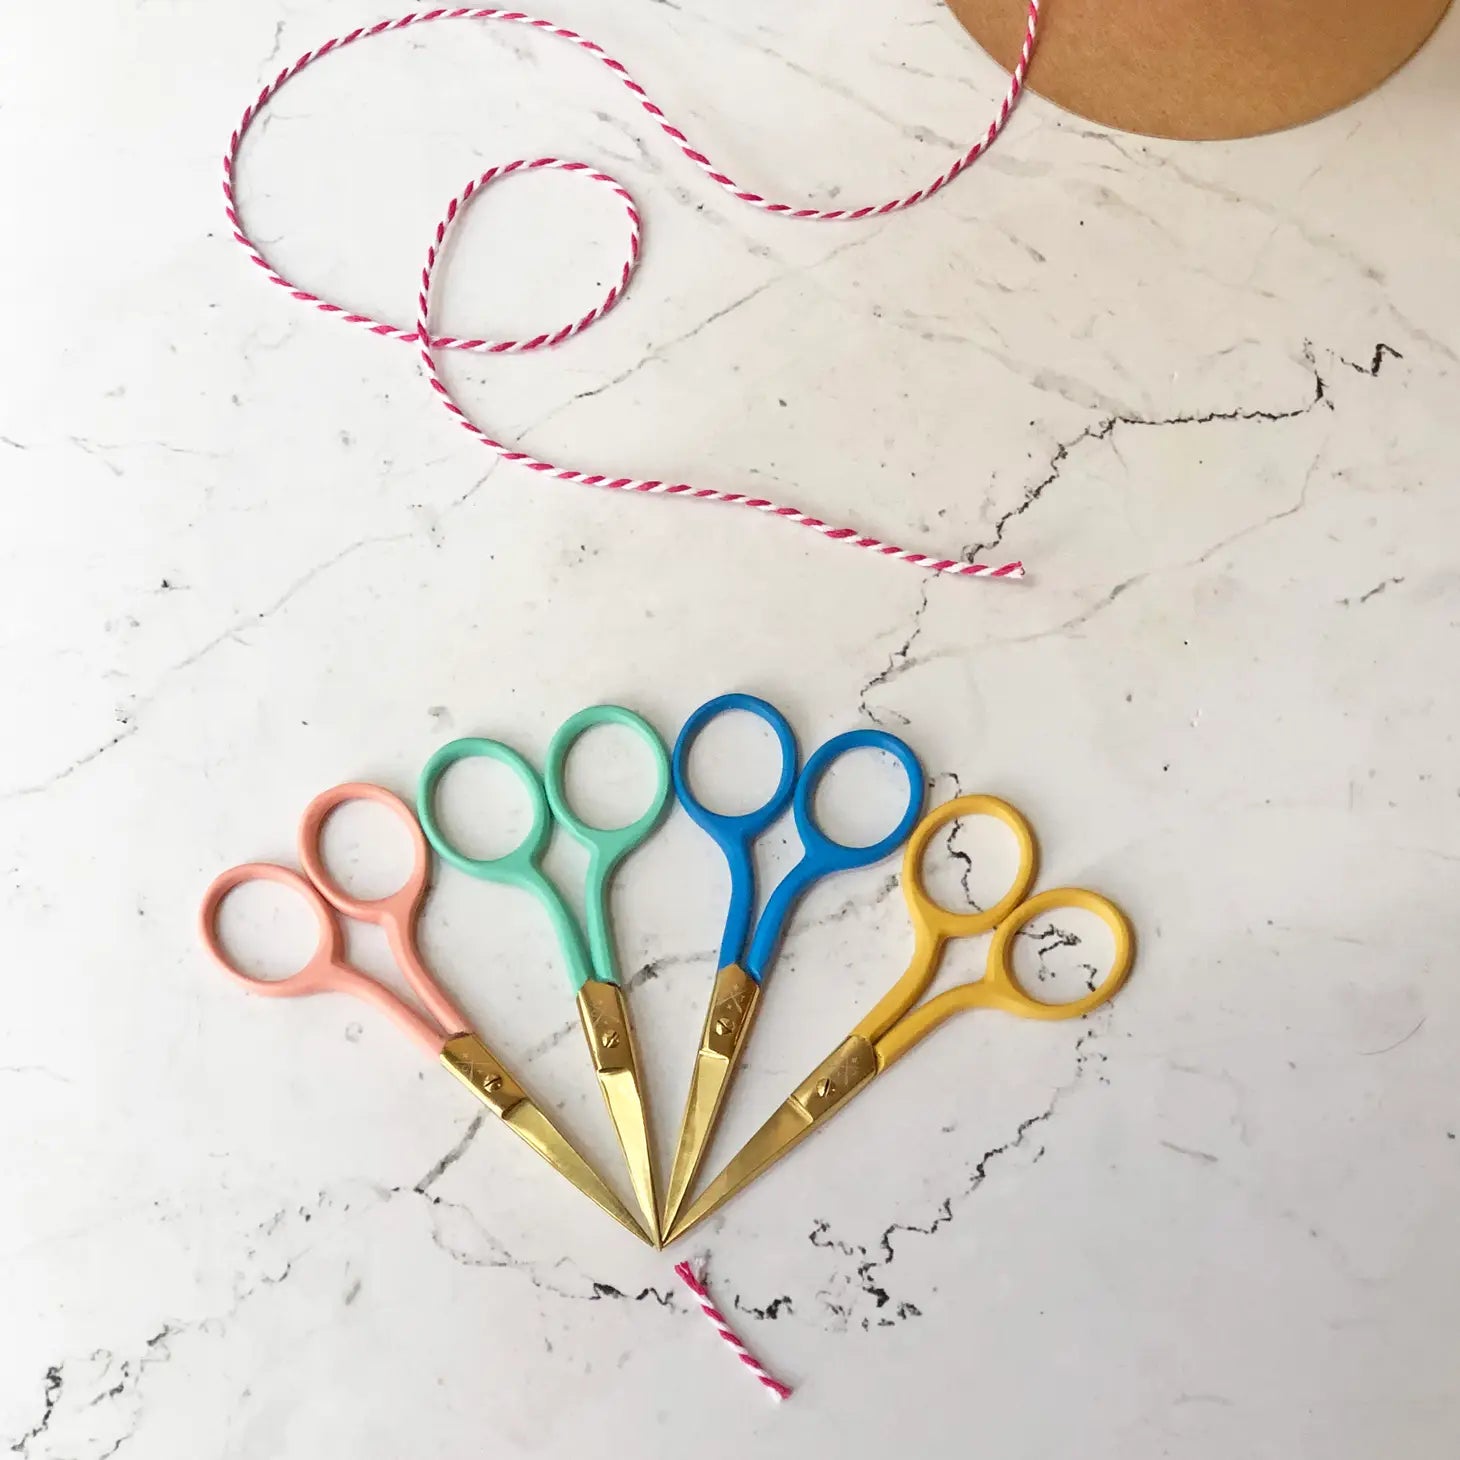 Coloured Embroidery Scissors from Chasing Threads